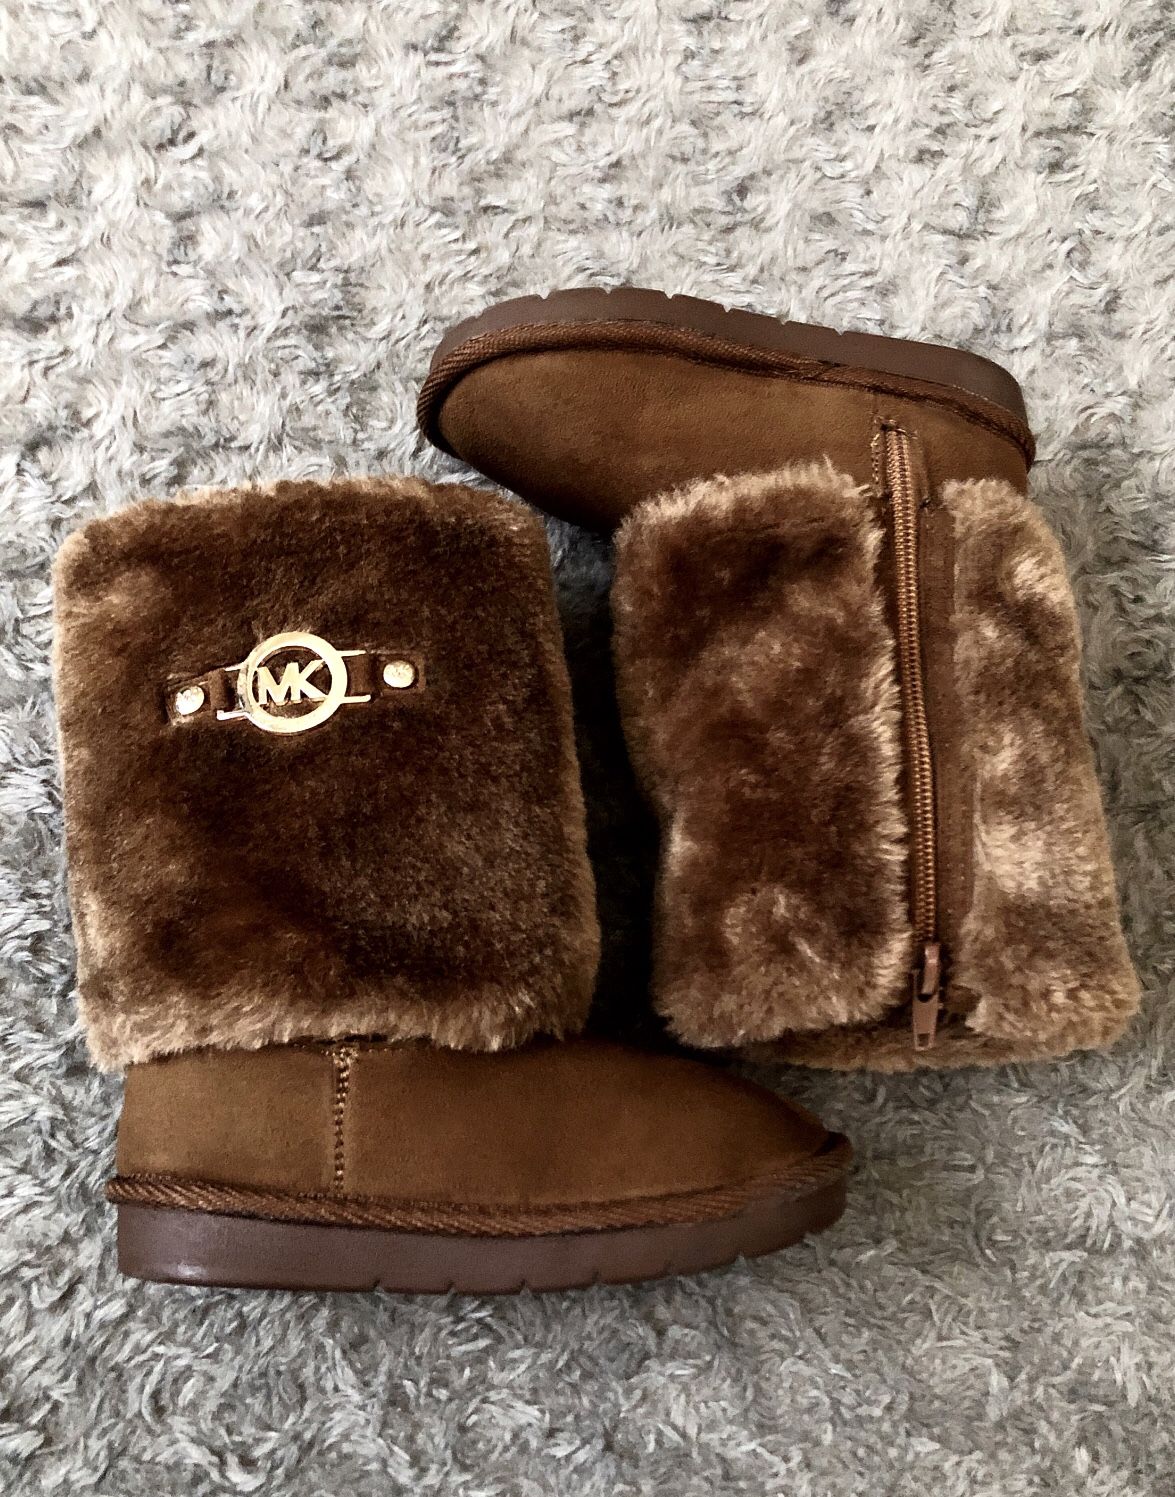 Girls Michael Kors Maybeth Brown fur boots Retail $70 Size 8. Good condition has normal wear! Faux fur side up boots super cozy! The brown suede & fu